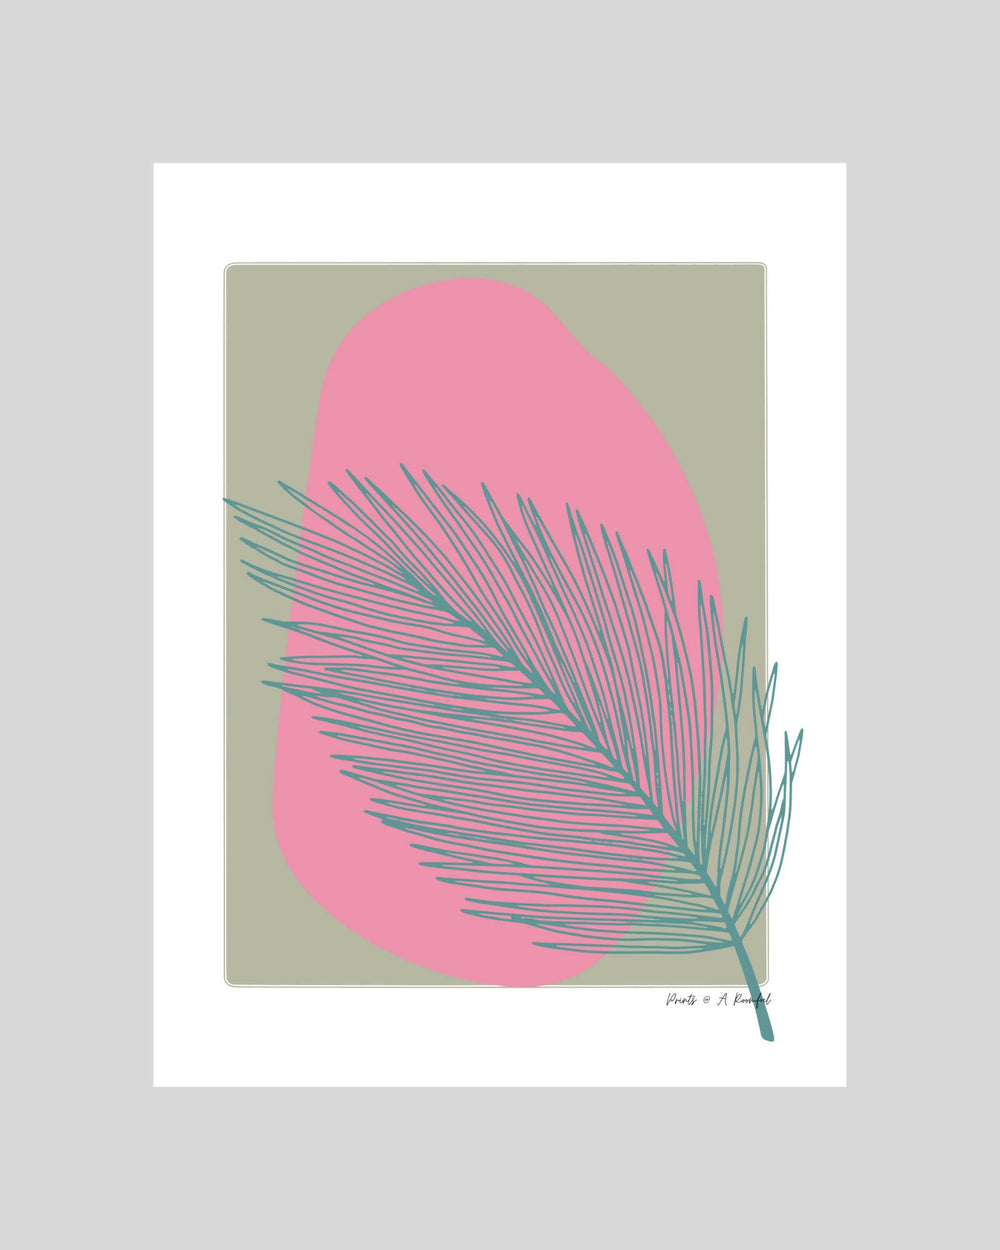 Wall art print : Inspired by nature (Green) Prints Prints@ARoomful 